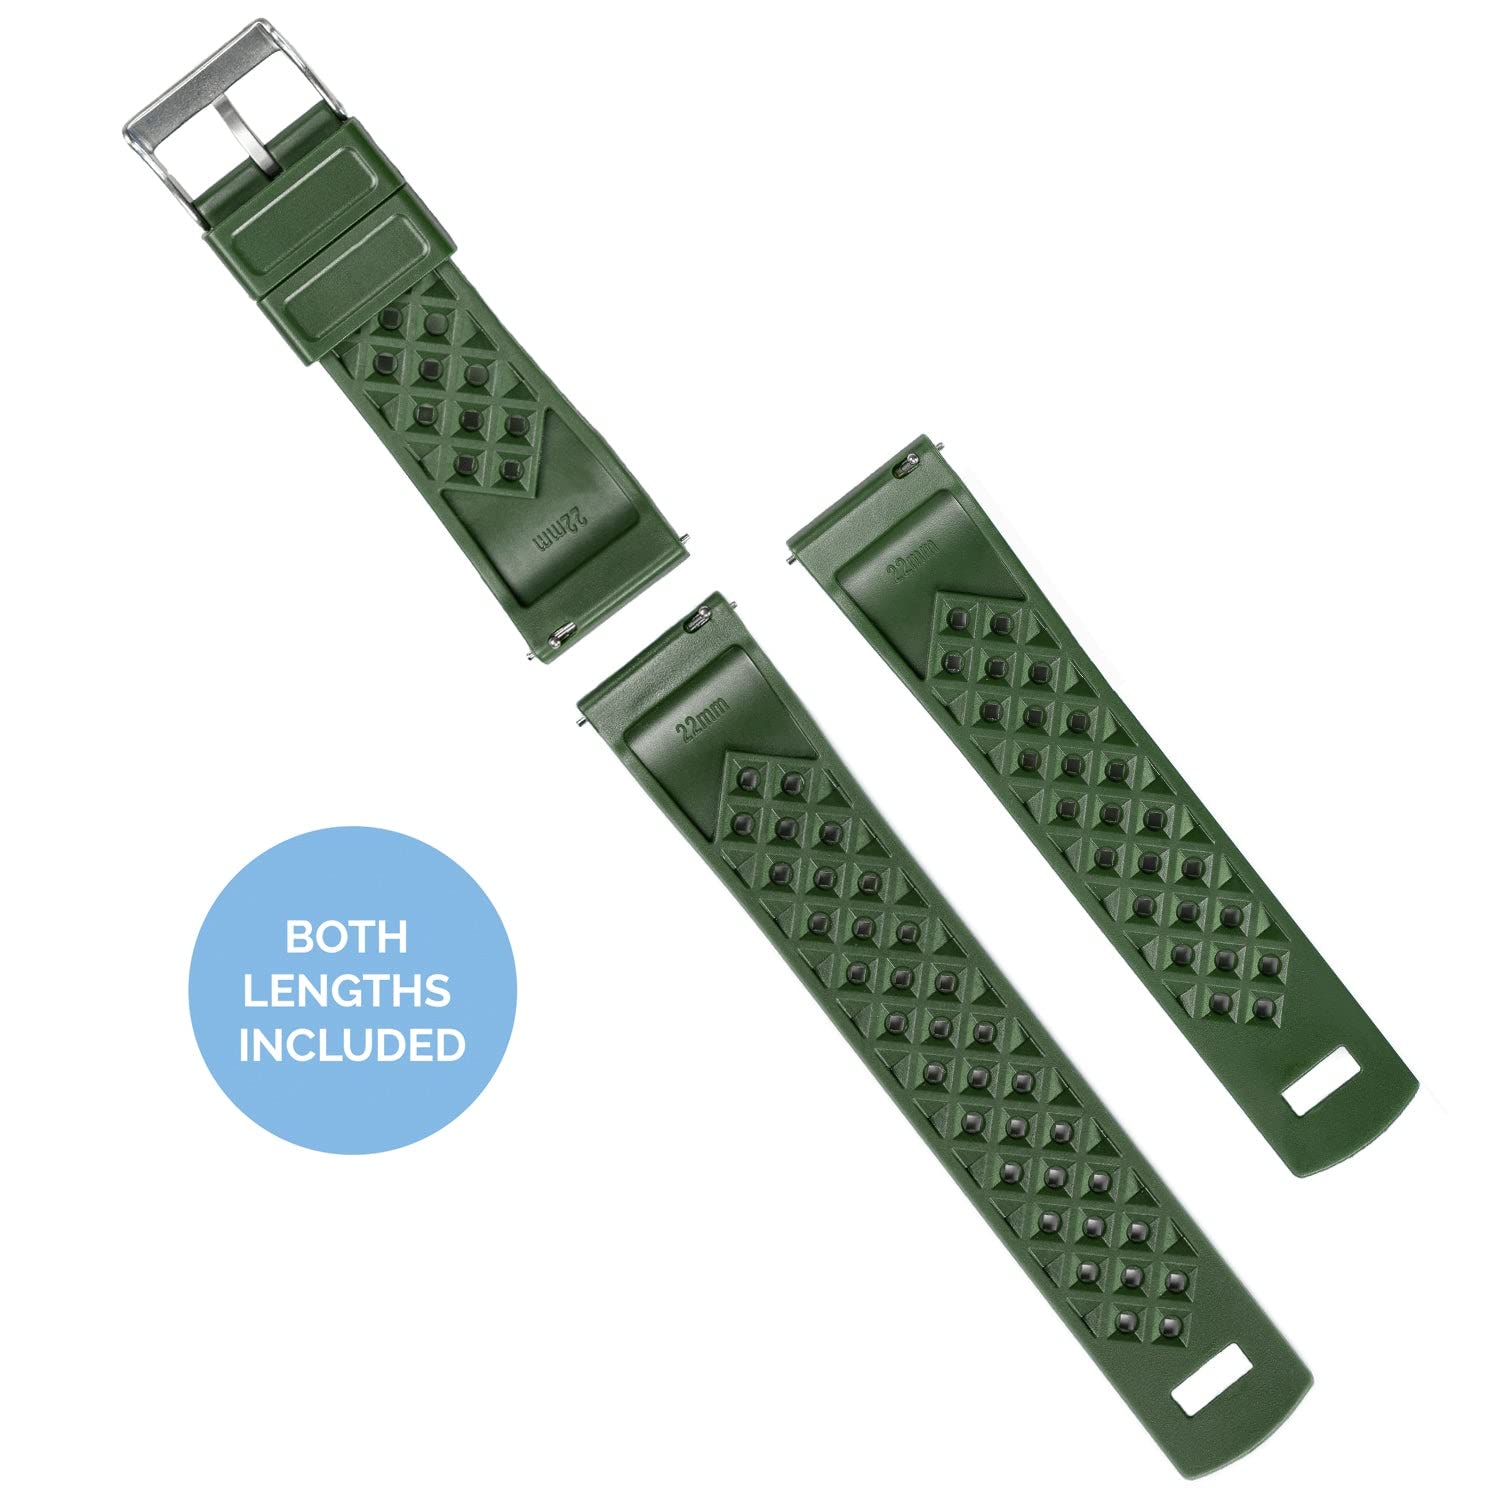 BARTON Tropical-Style 2.0 Watch Bands - Quick Release - Choose Strap Color & Size - 18mm, 19mm, 20mm, 21mm, 22mm, 23mm & 24mm Watch Straps